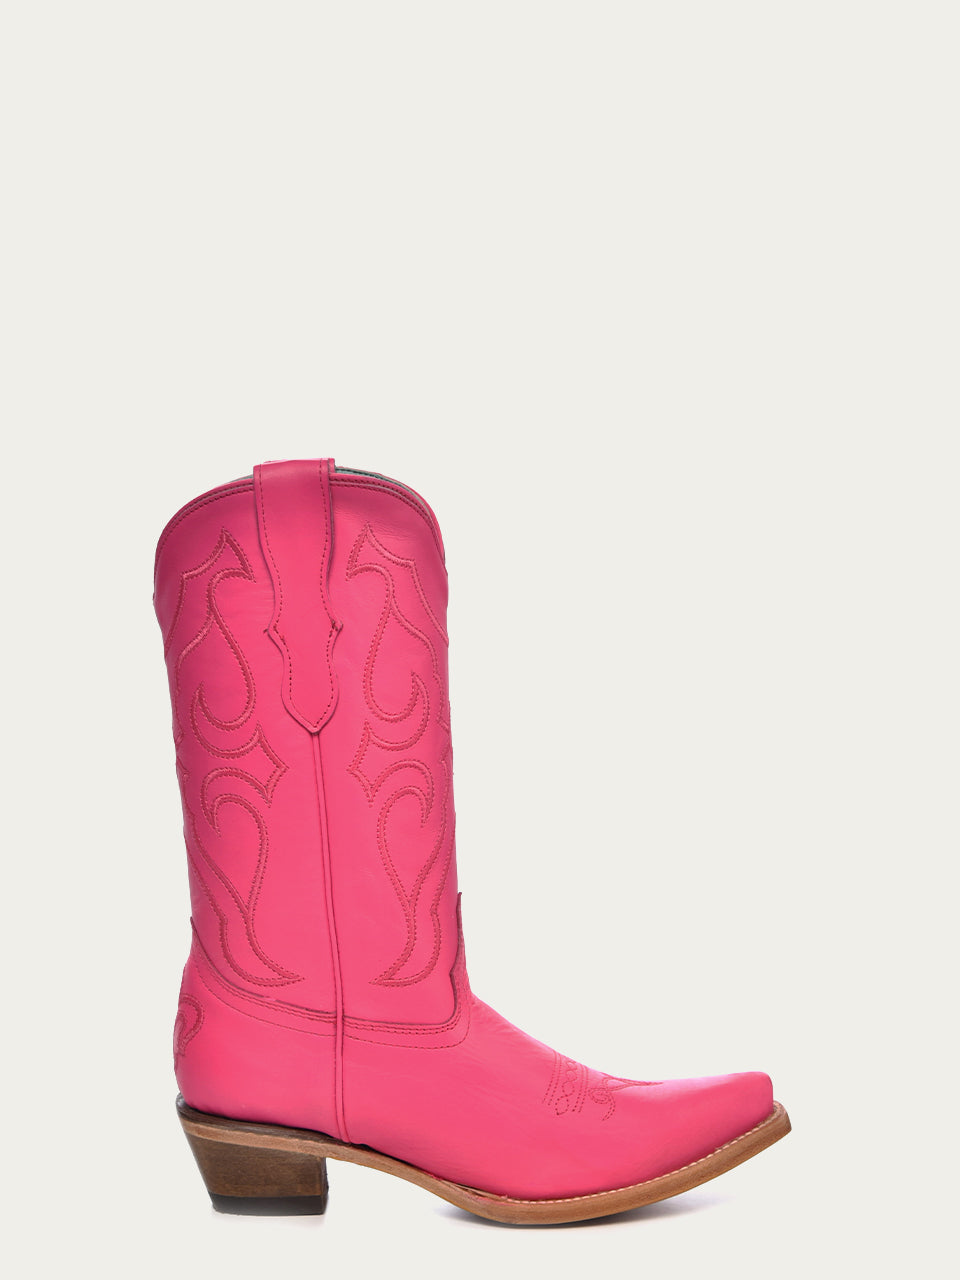 Girls' Cowgirl Boots | Corral Boots – Corral Boot Company LLC